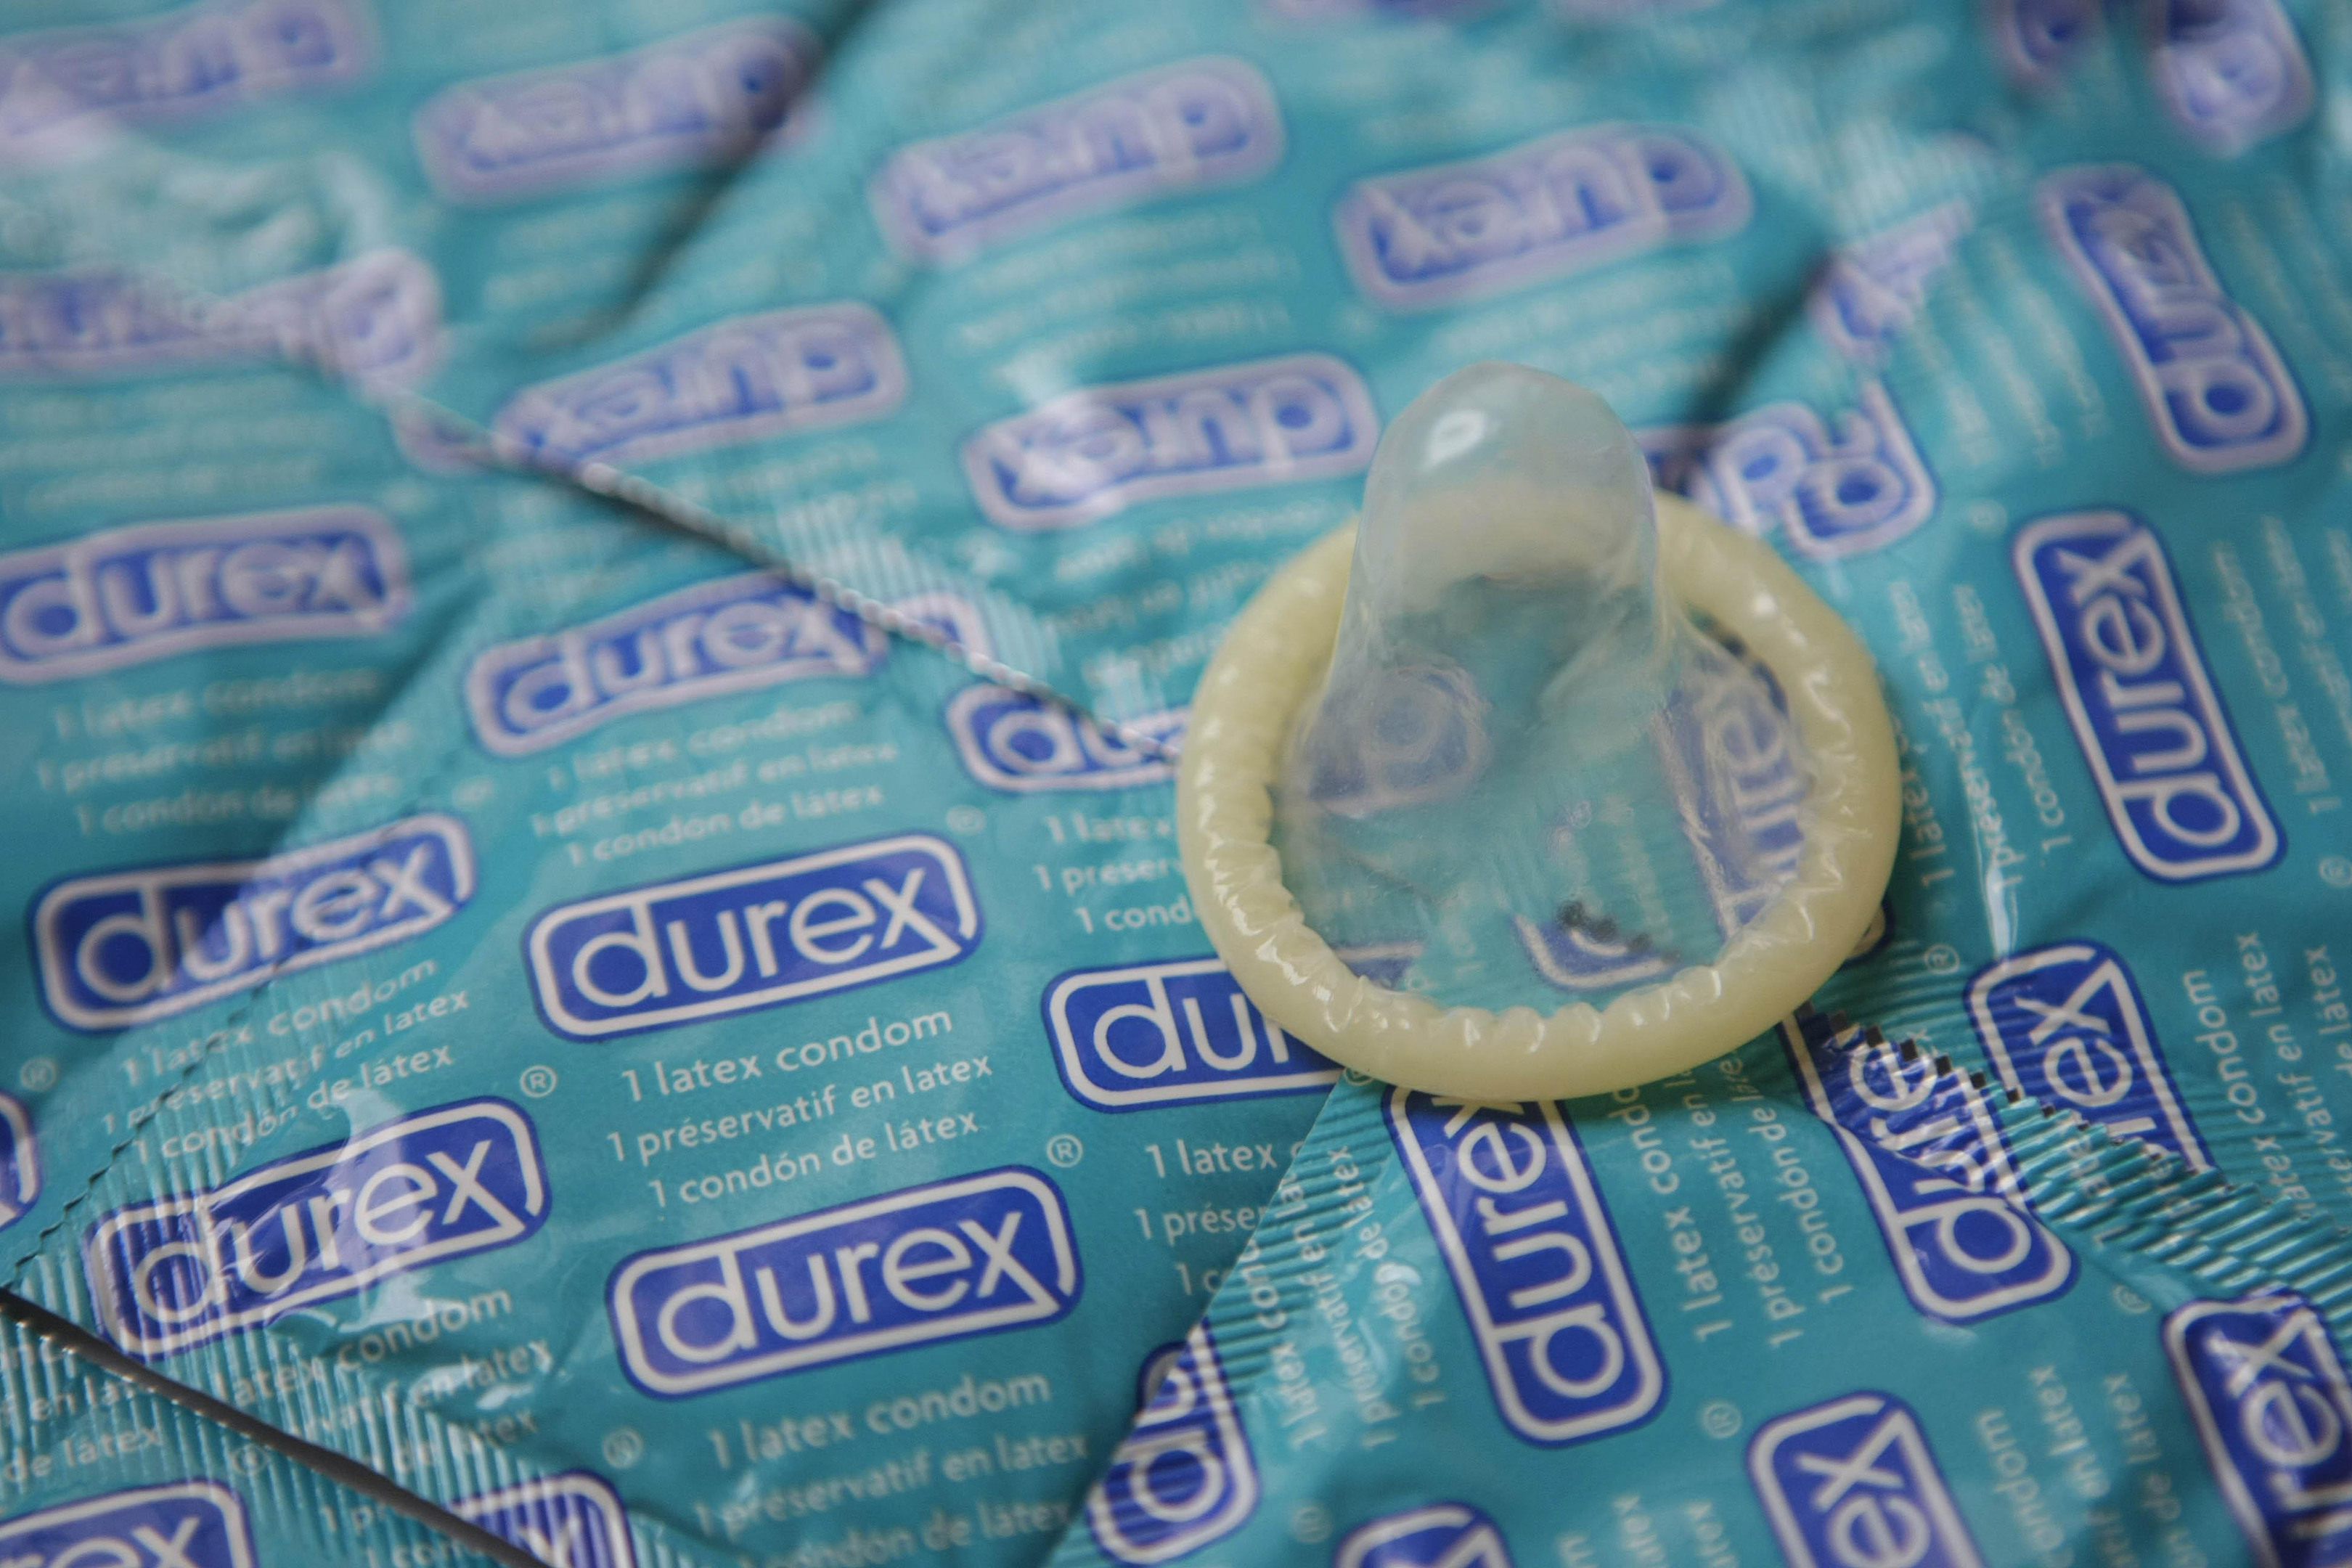 Close to £60,000 has been spent on free contraception during the past five years.